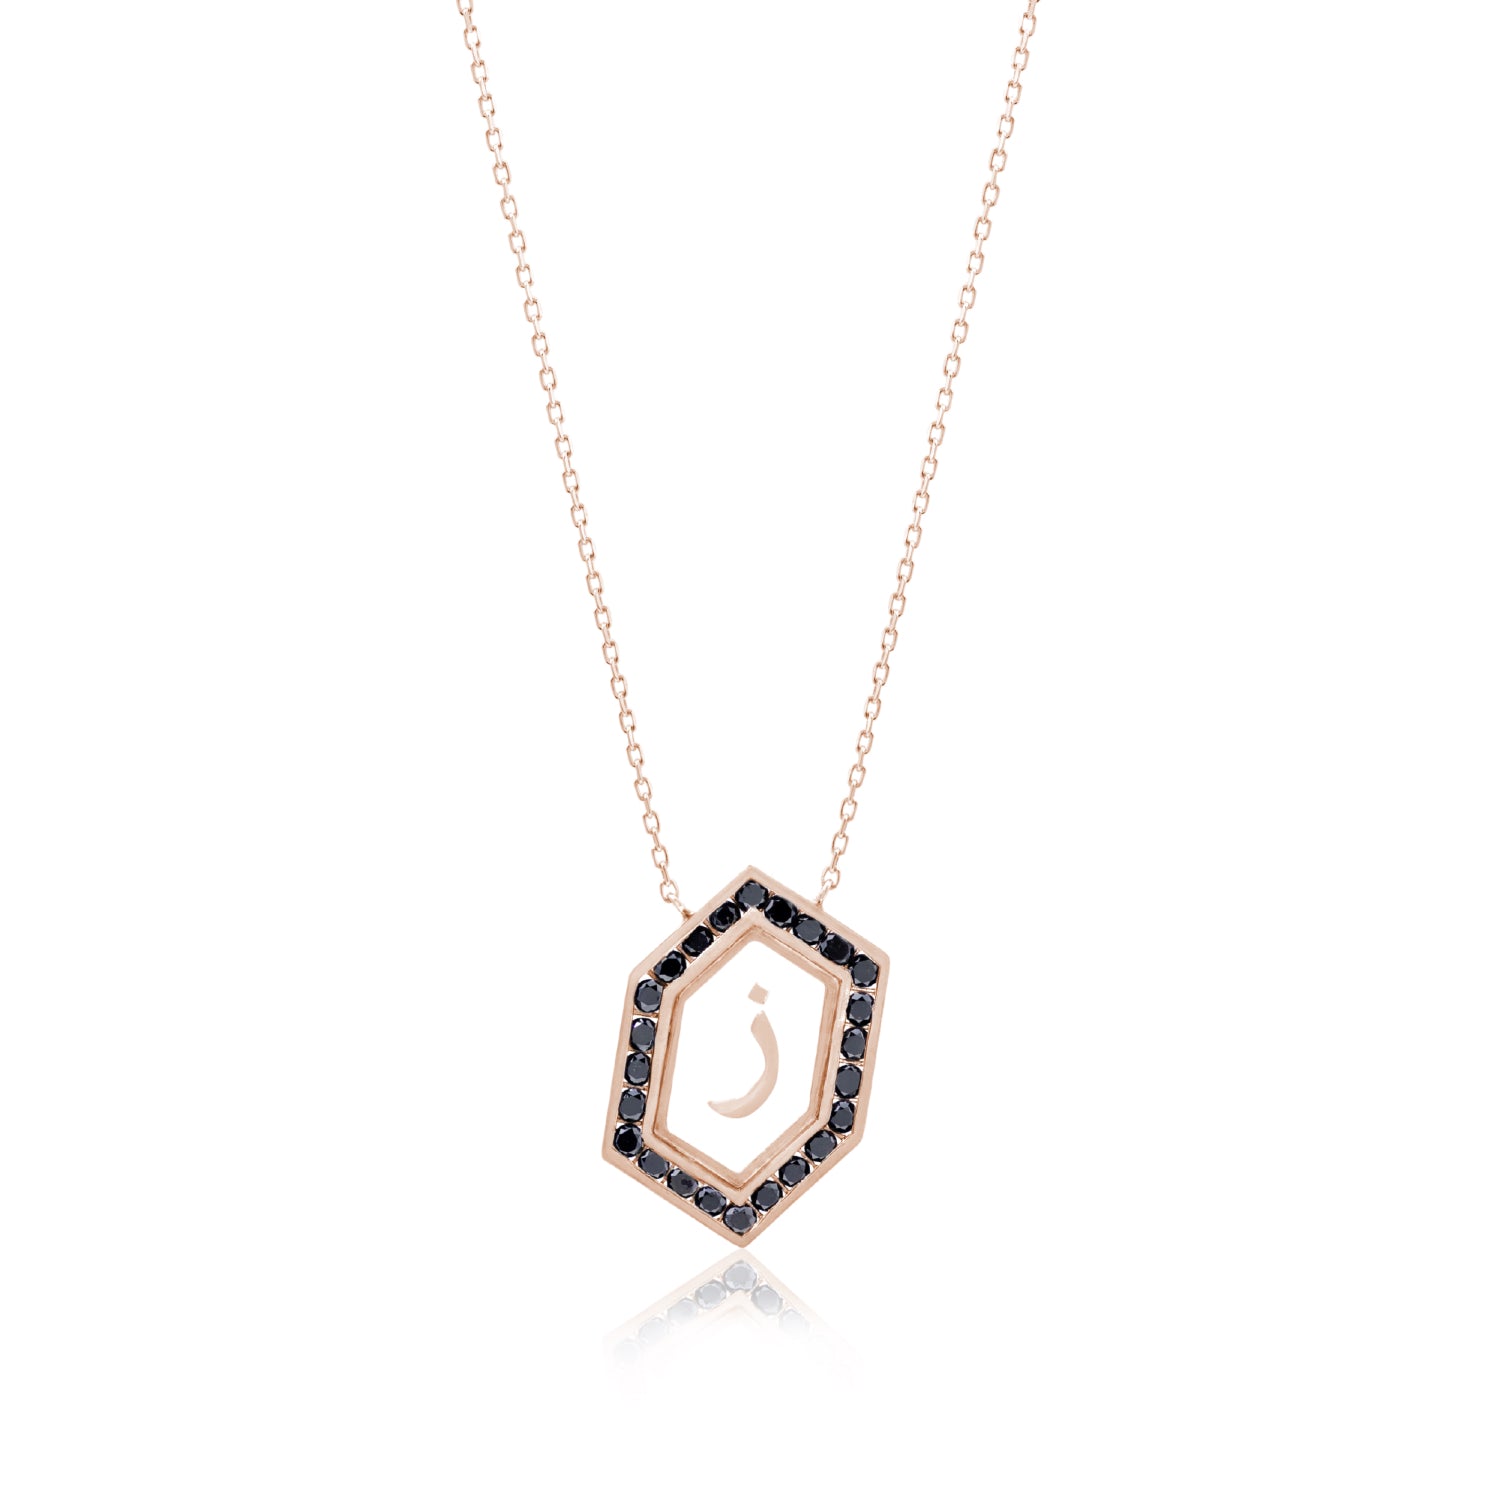 Qamoos 1.0 Letter ز Black Diamond Necklace in Rose Gold